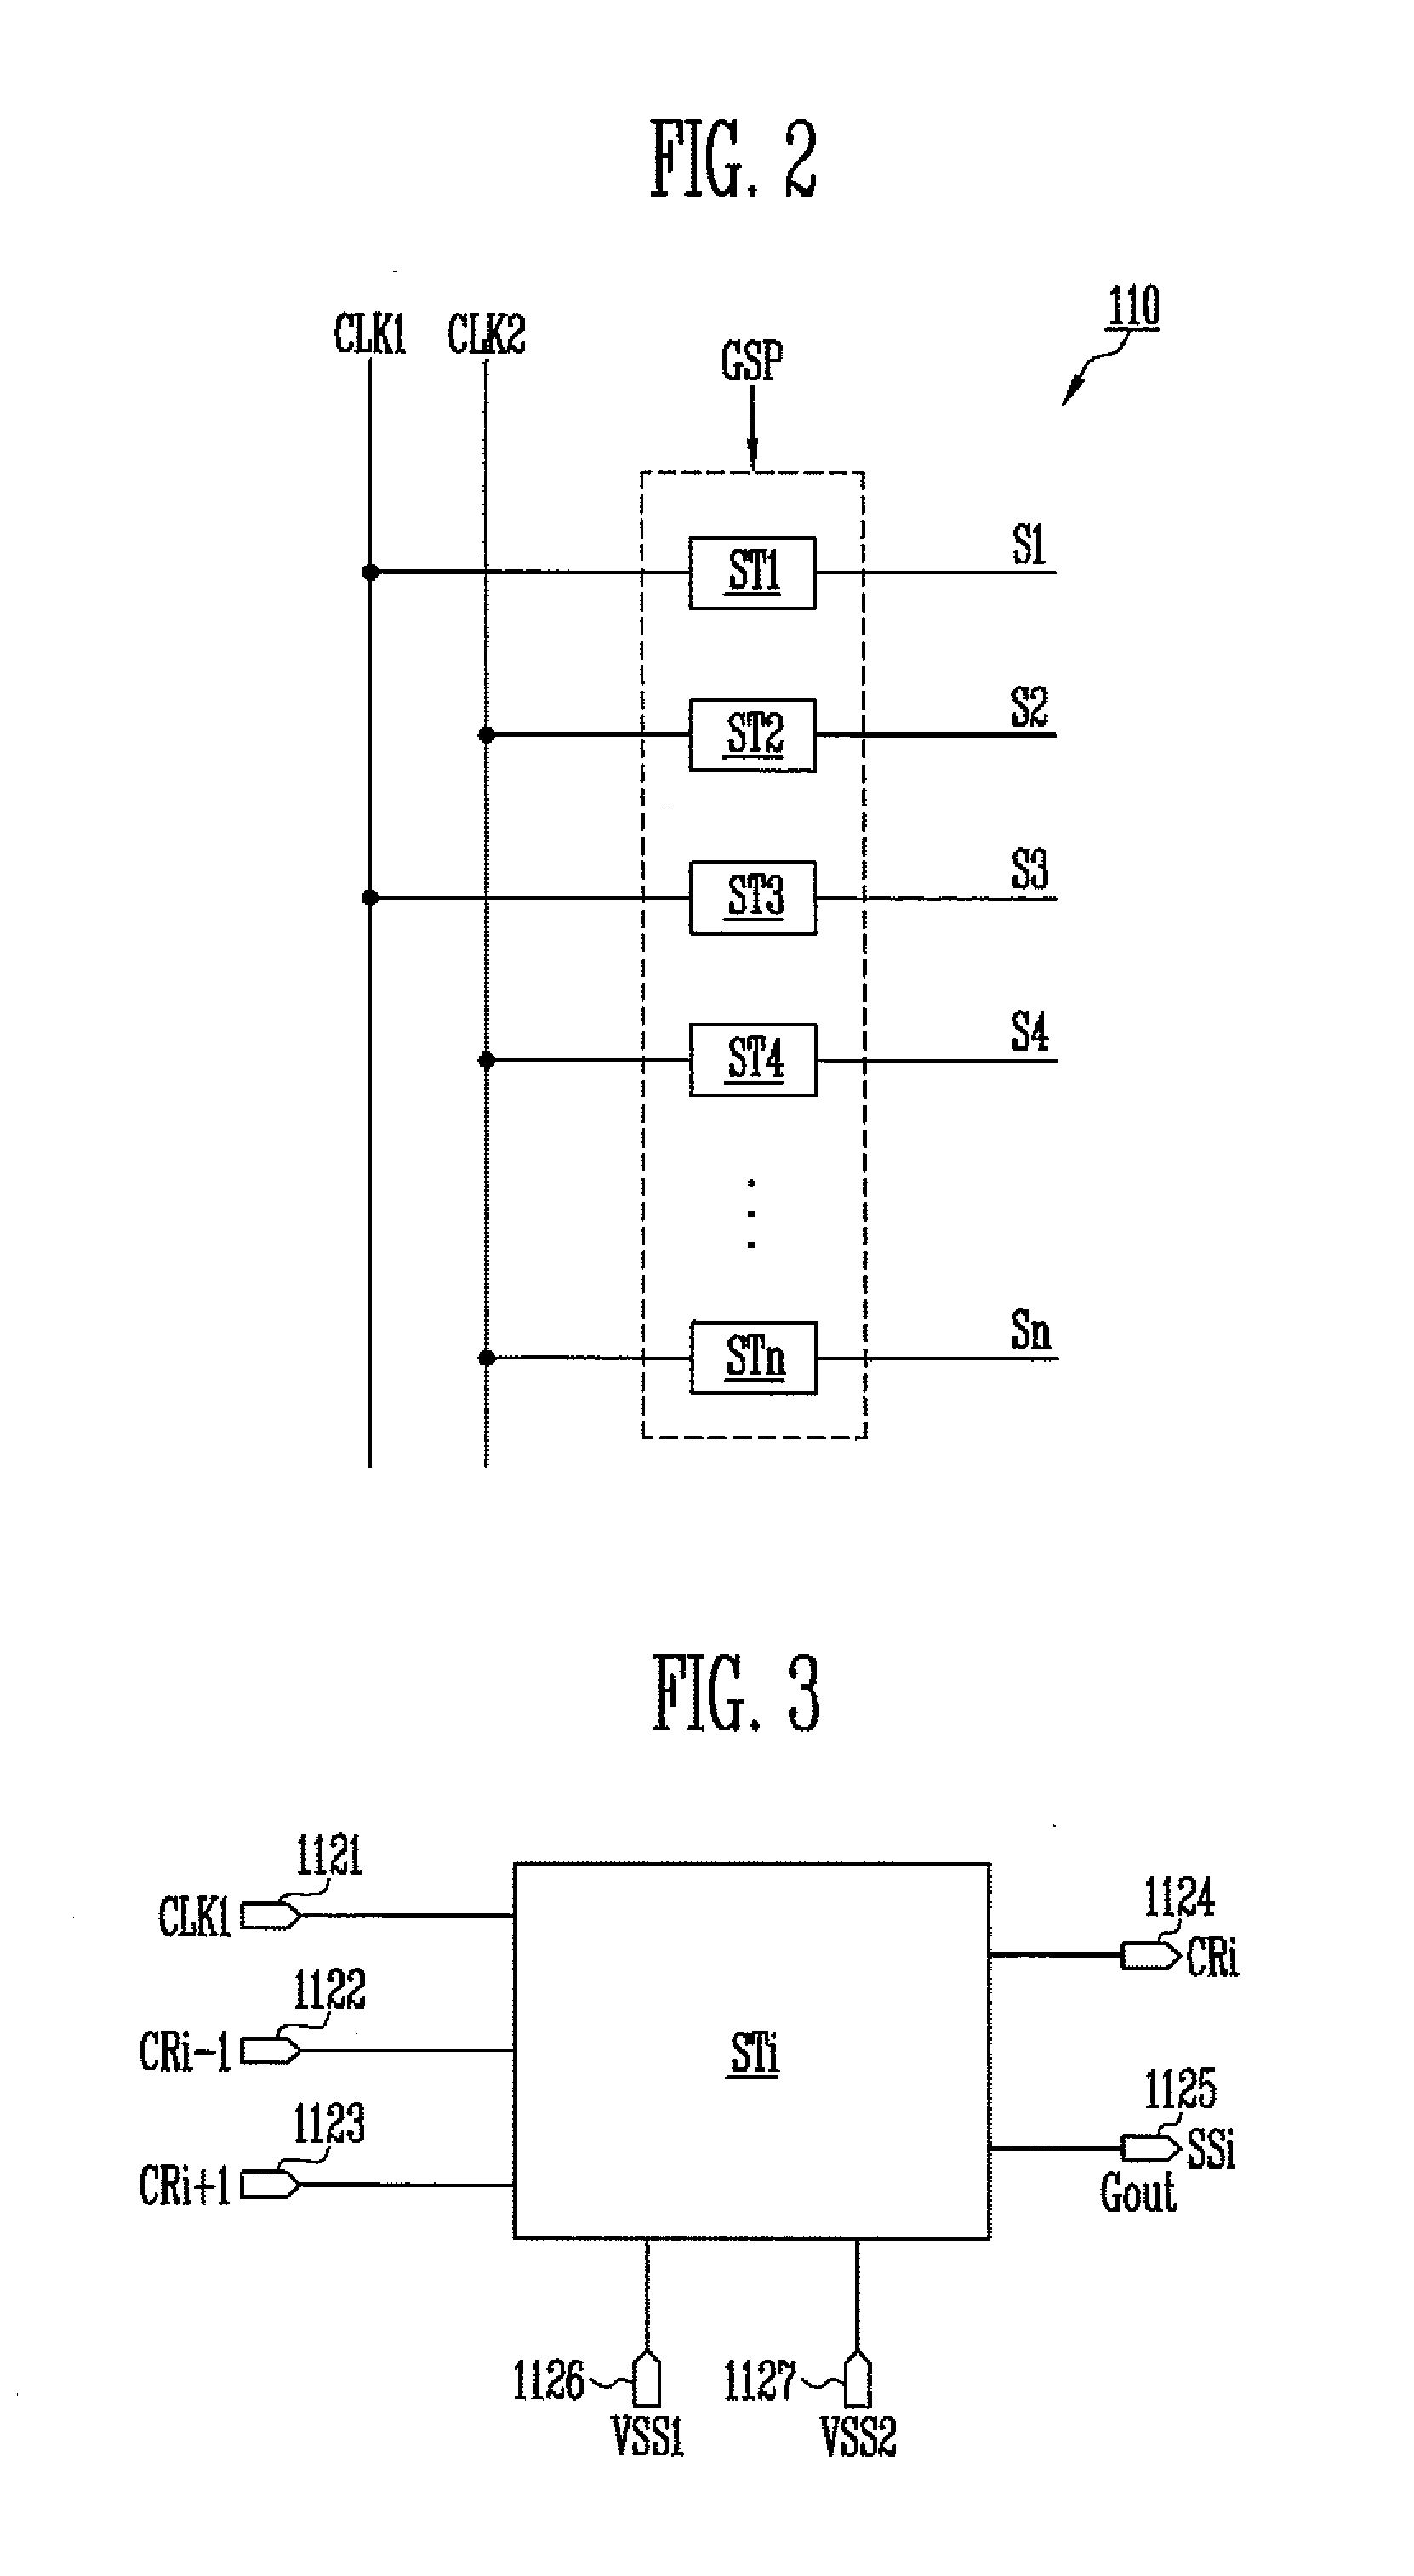 Stage circuit and scan driver using the same